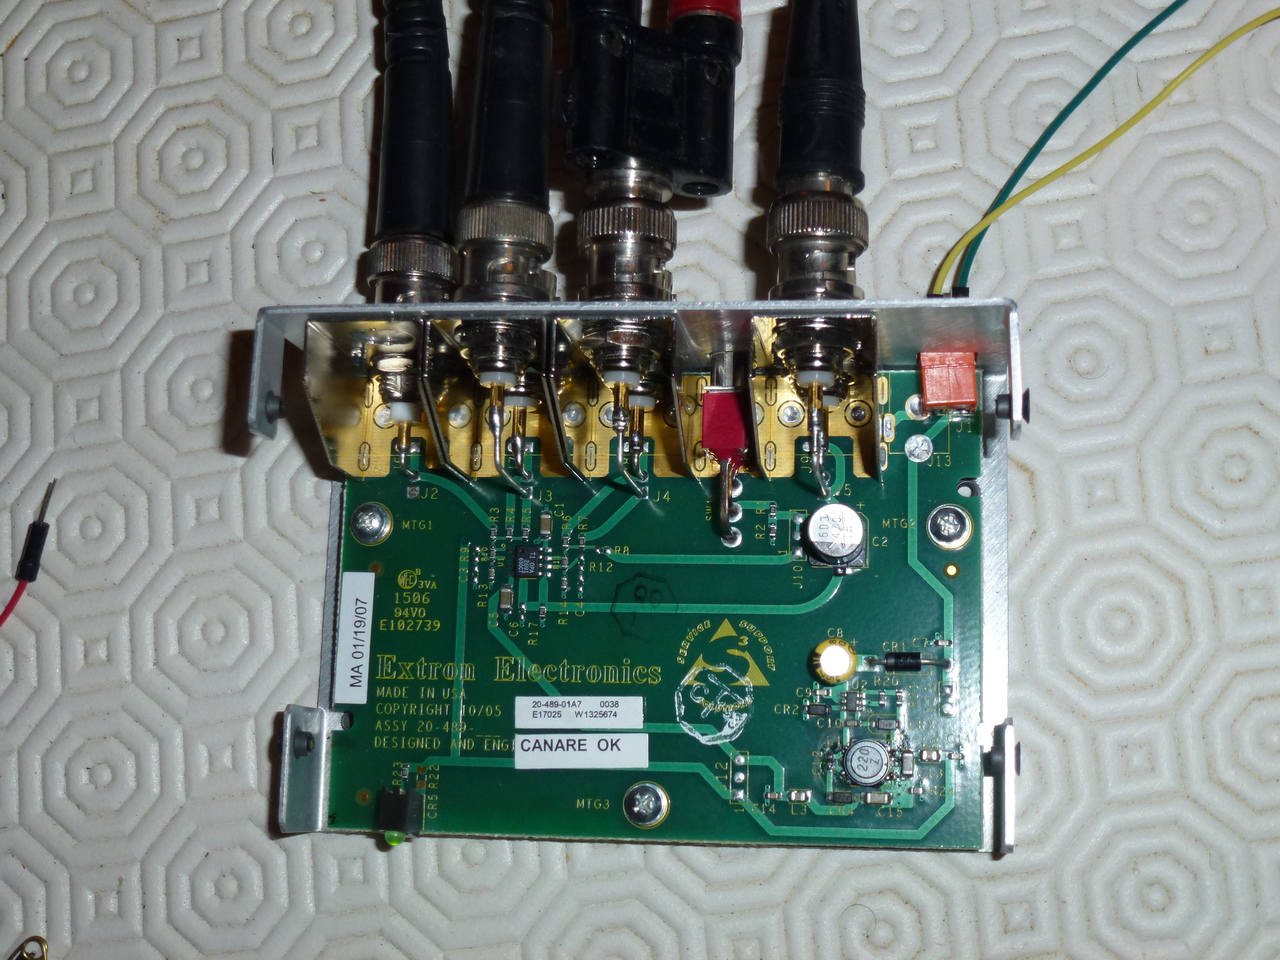 The Extron Video Distribution Amplifier fixed with a new inductor for its small DC-DC converter.